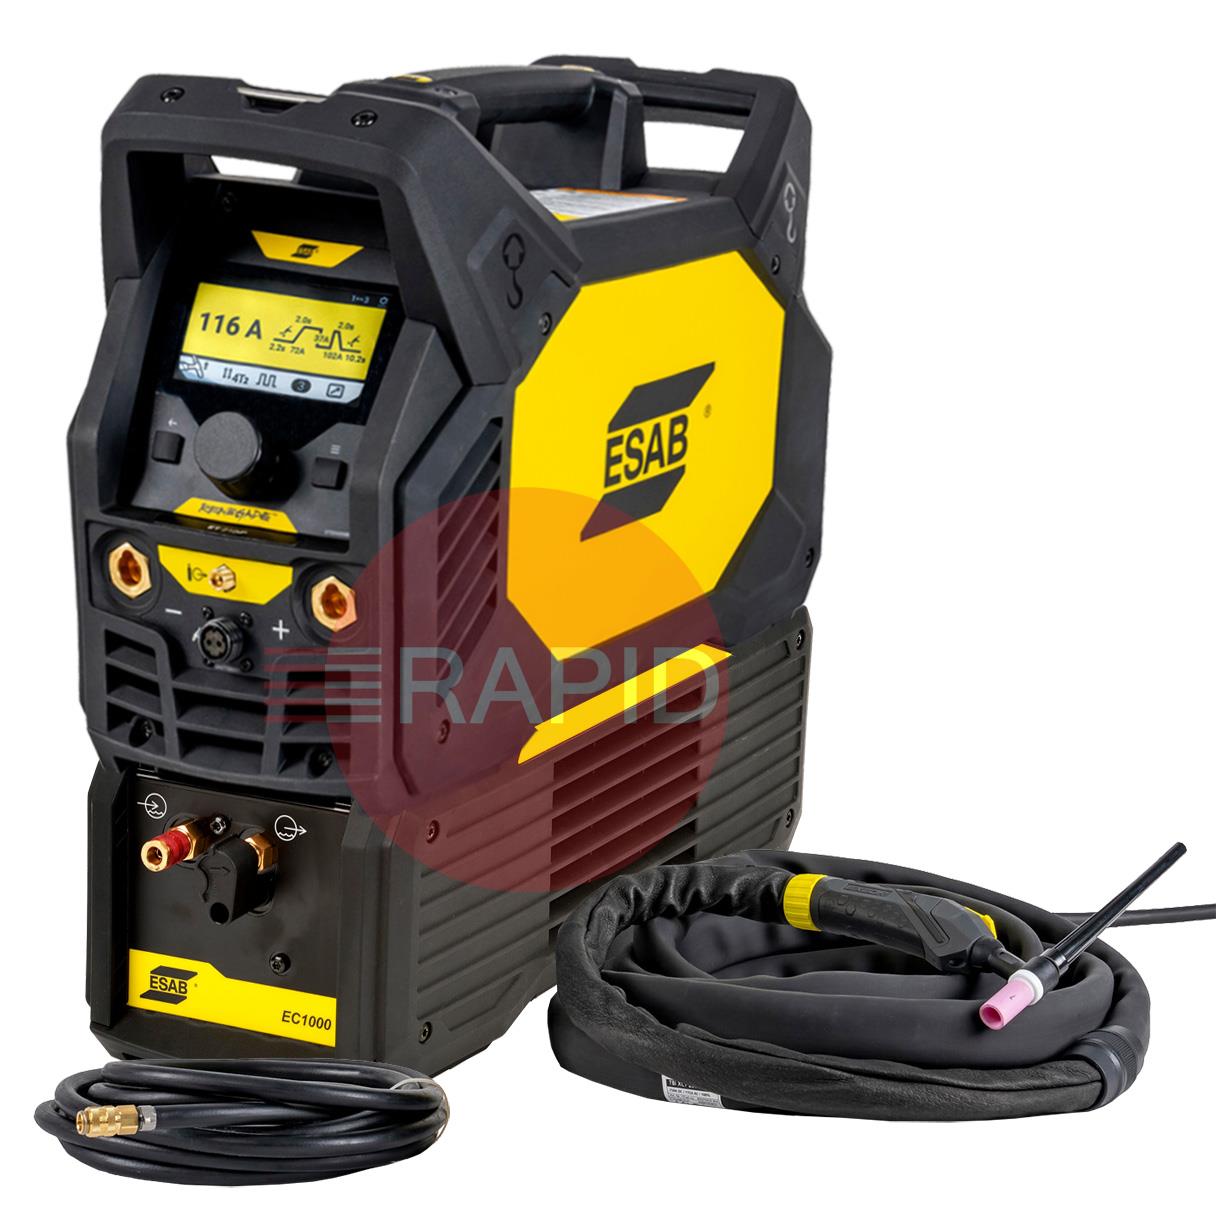 0447750891  ESAB Renegade ET 210iP DC Advanced Ready To Weld Water-Cooled Package with 4m TIG Torch - 115 / 230v, 1ph